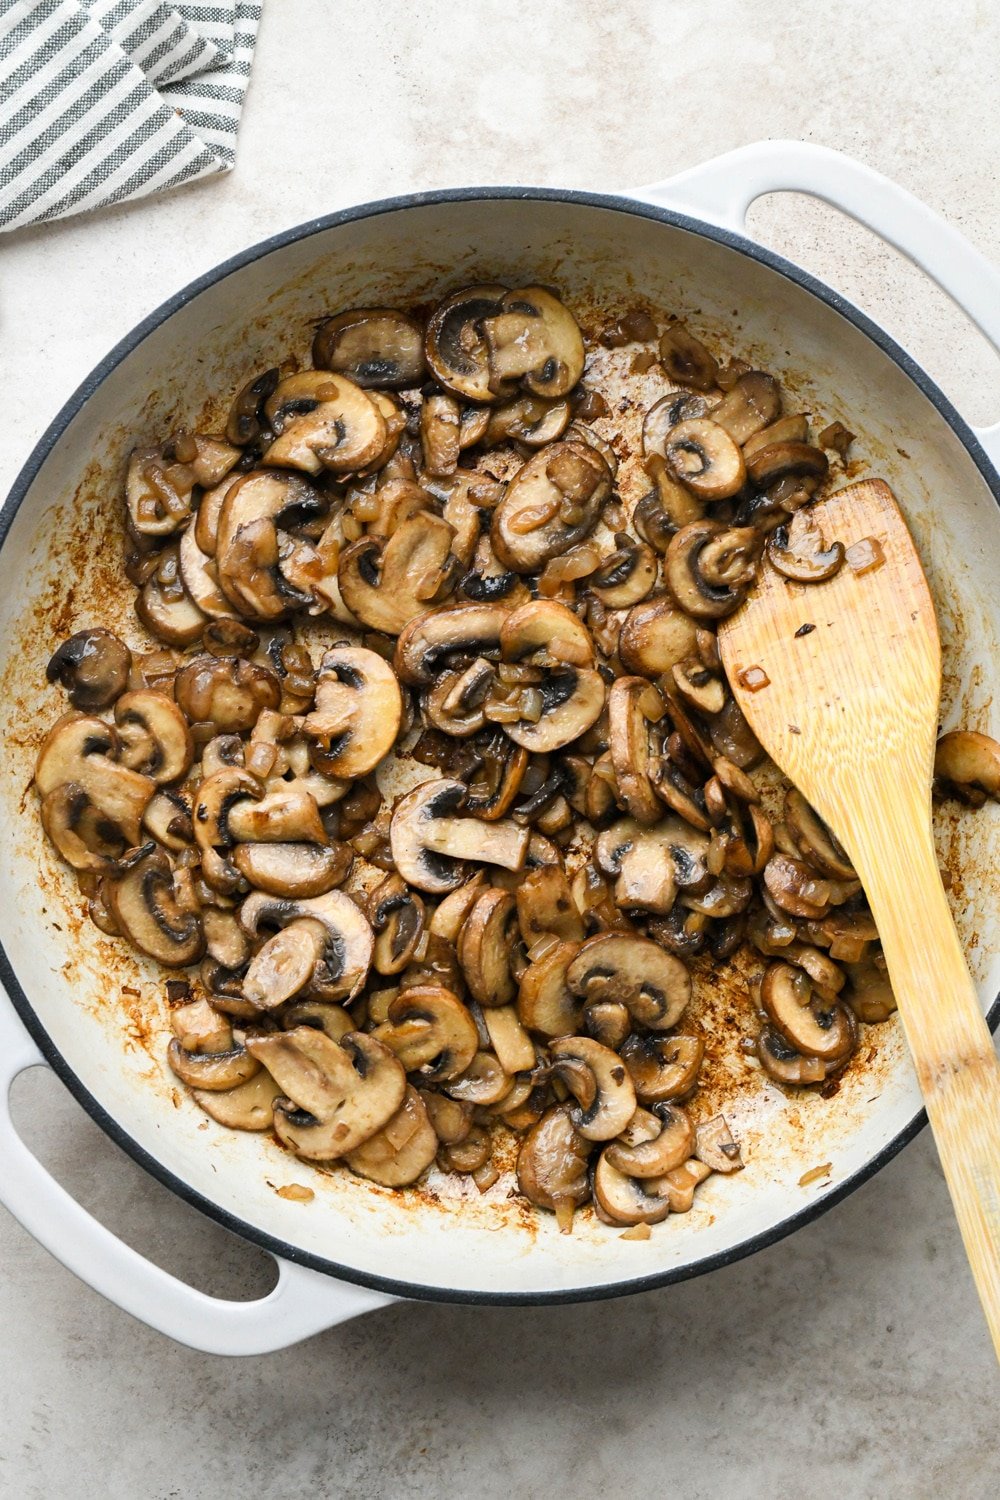 How to make Gluten Free Mushroom Gravy: Mushrooms and onions in a large skillet after sautéing until deeply golden brown.